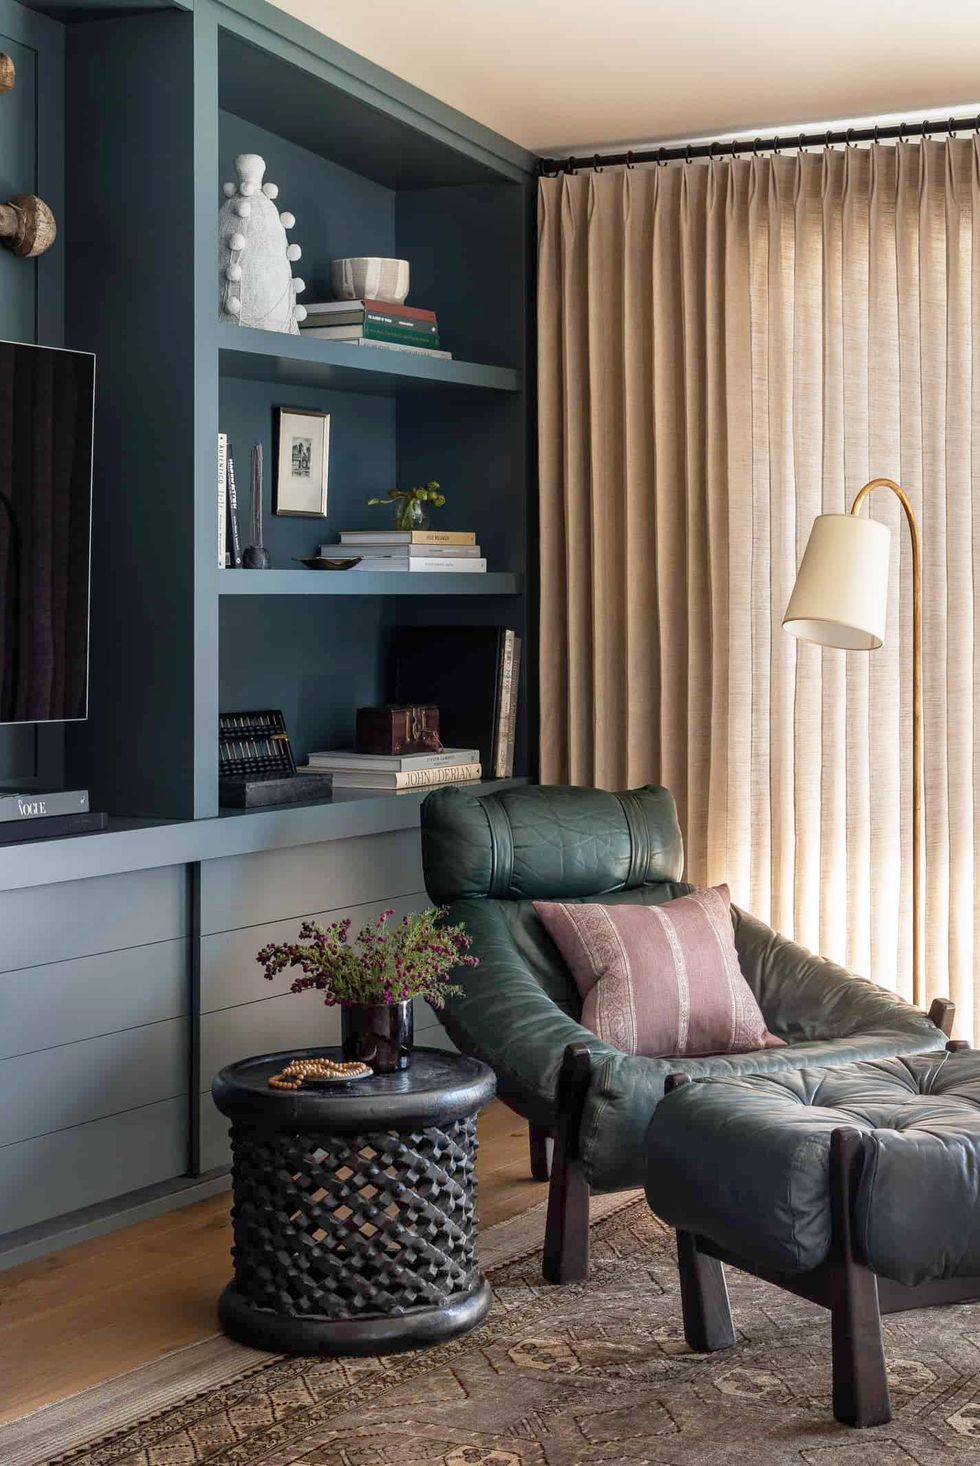 accent wall 25 Rooms That Prove You Need an Accent Wall in Your Home accent walls heidi caillier design seattle interior designer olympic manor house modern traditional custom blue built ins bookshelves styling vintage leather chair brass lamp drapes mid century 1582662764